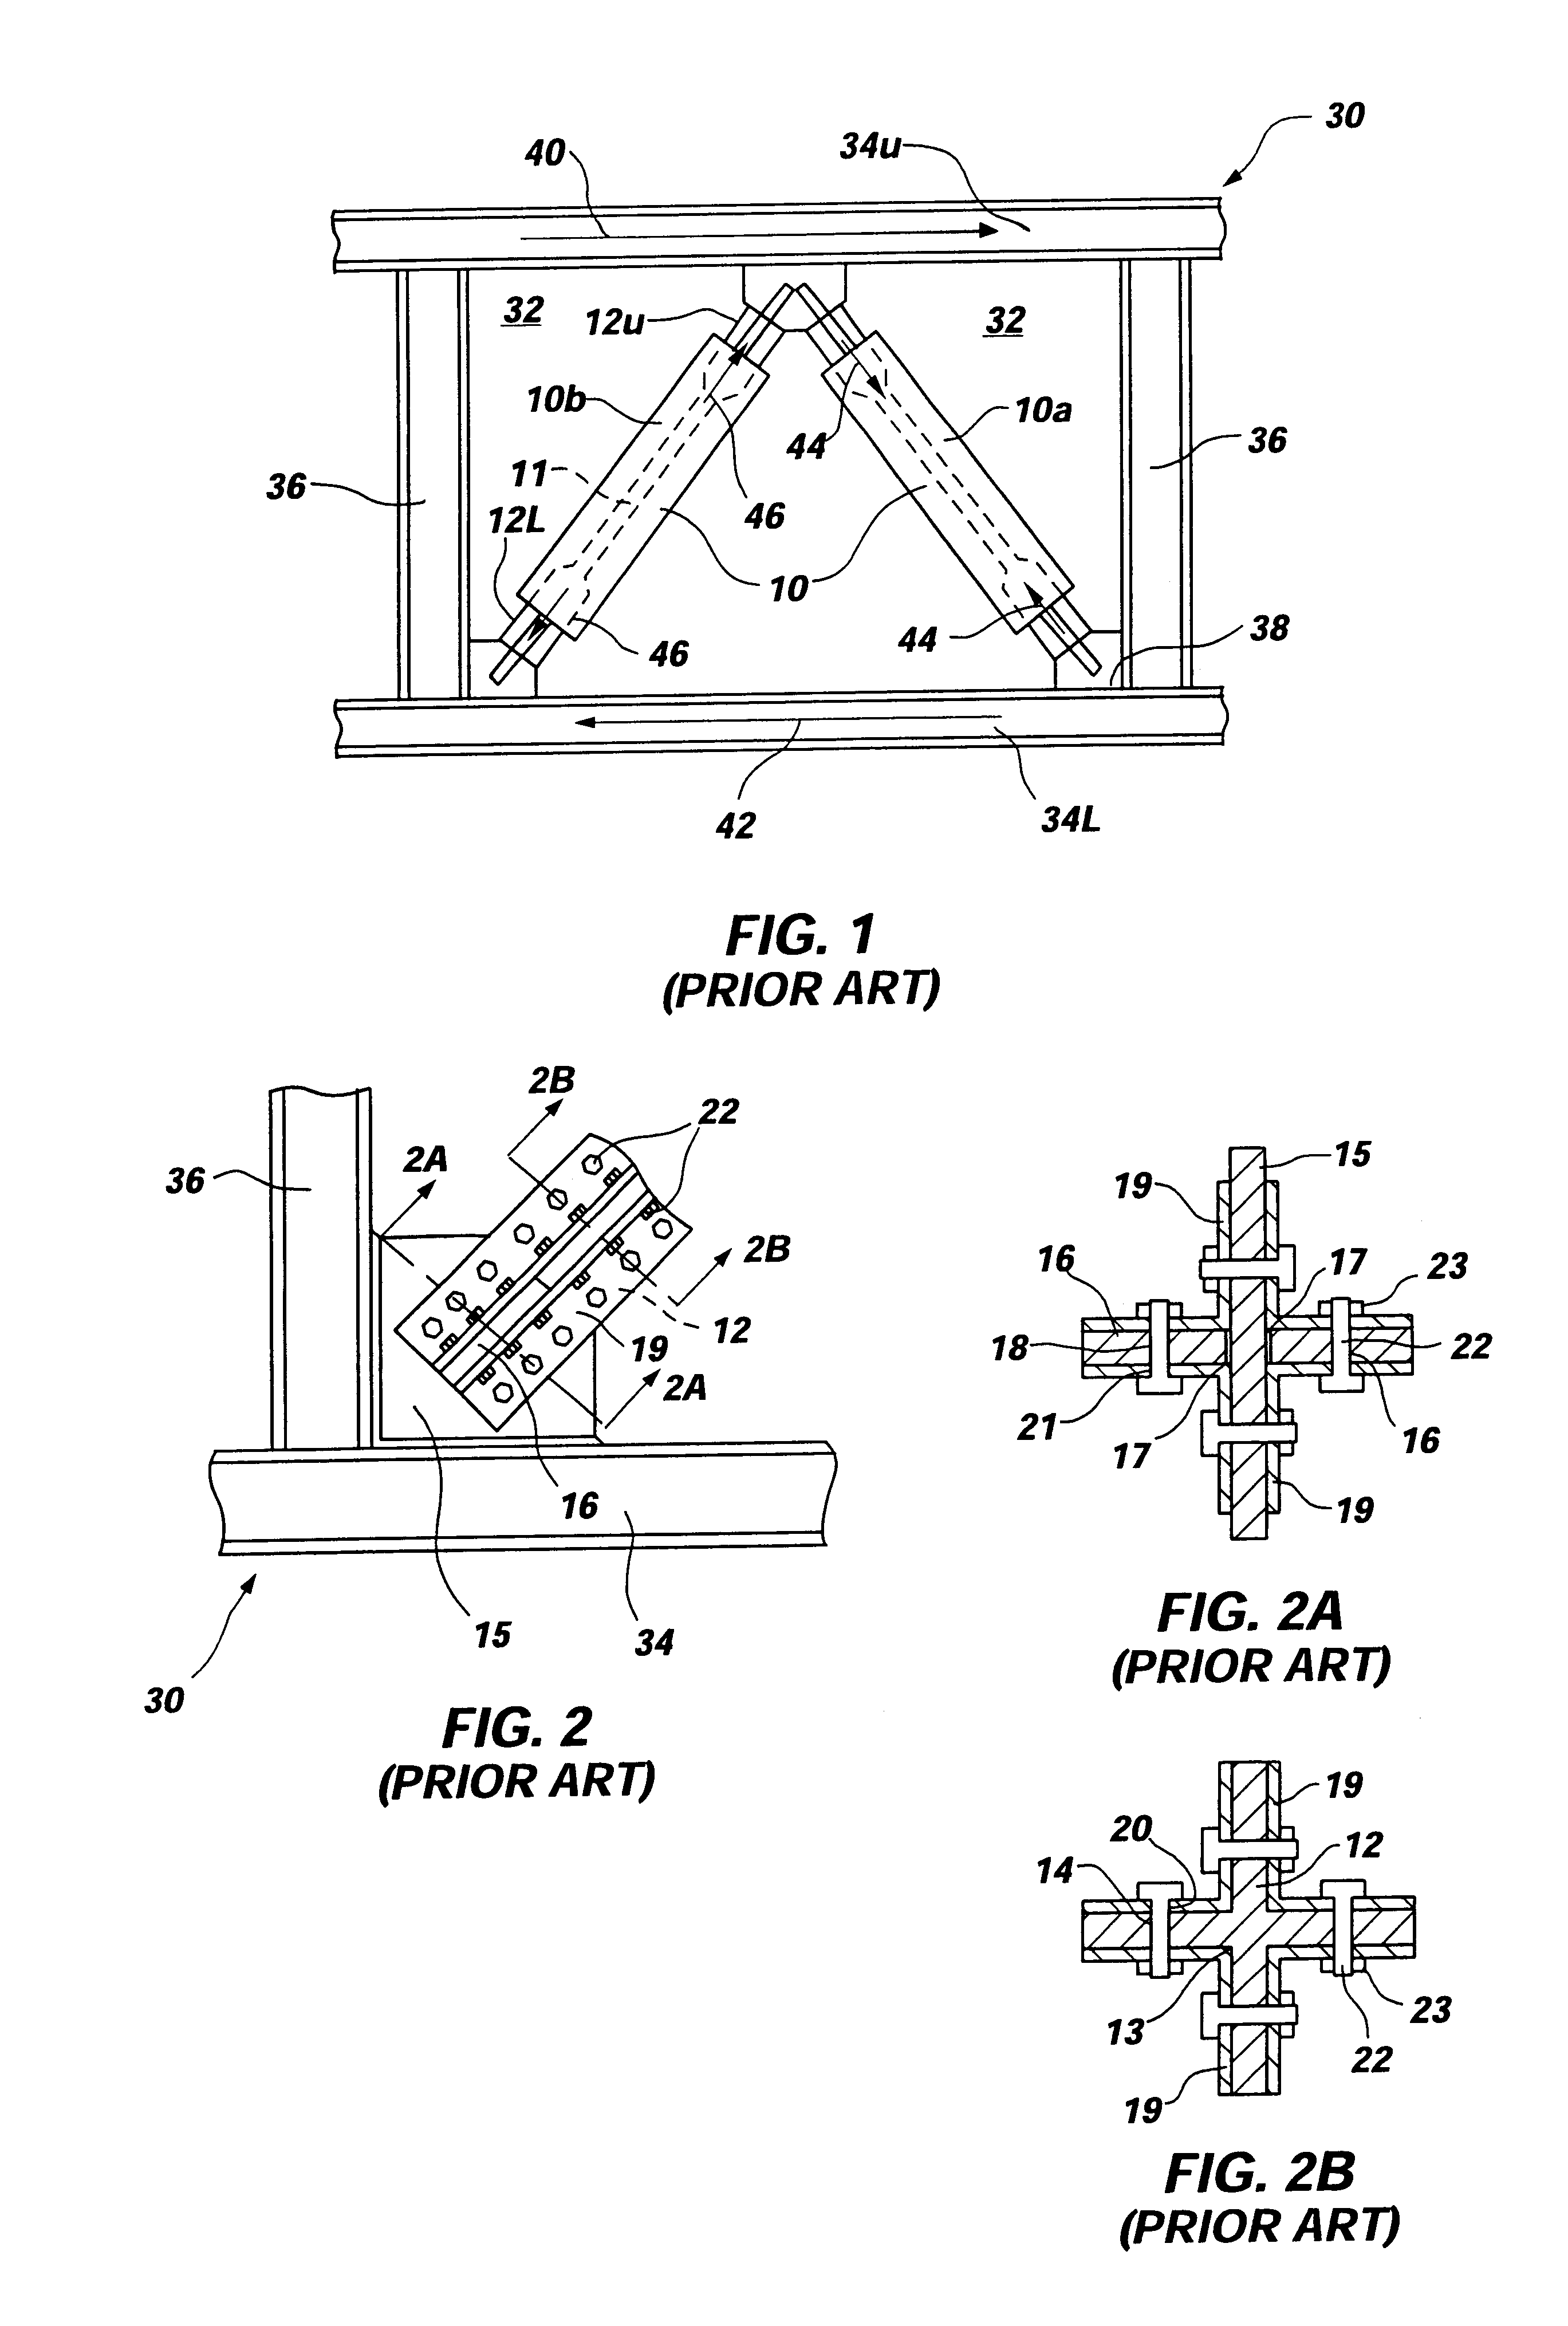 Pin and collar connection apparatus for use with seismic braces, seismic braces including the pin and collar connection, and methods